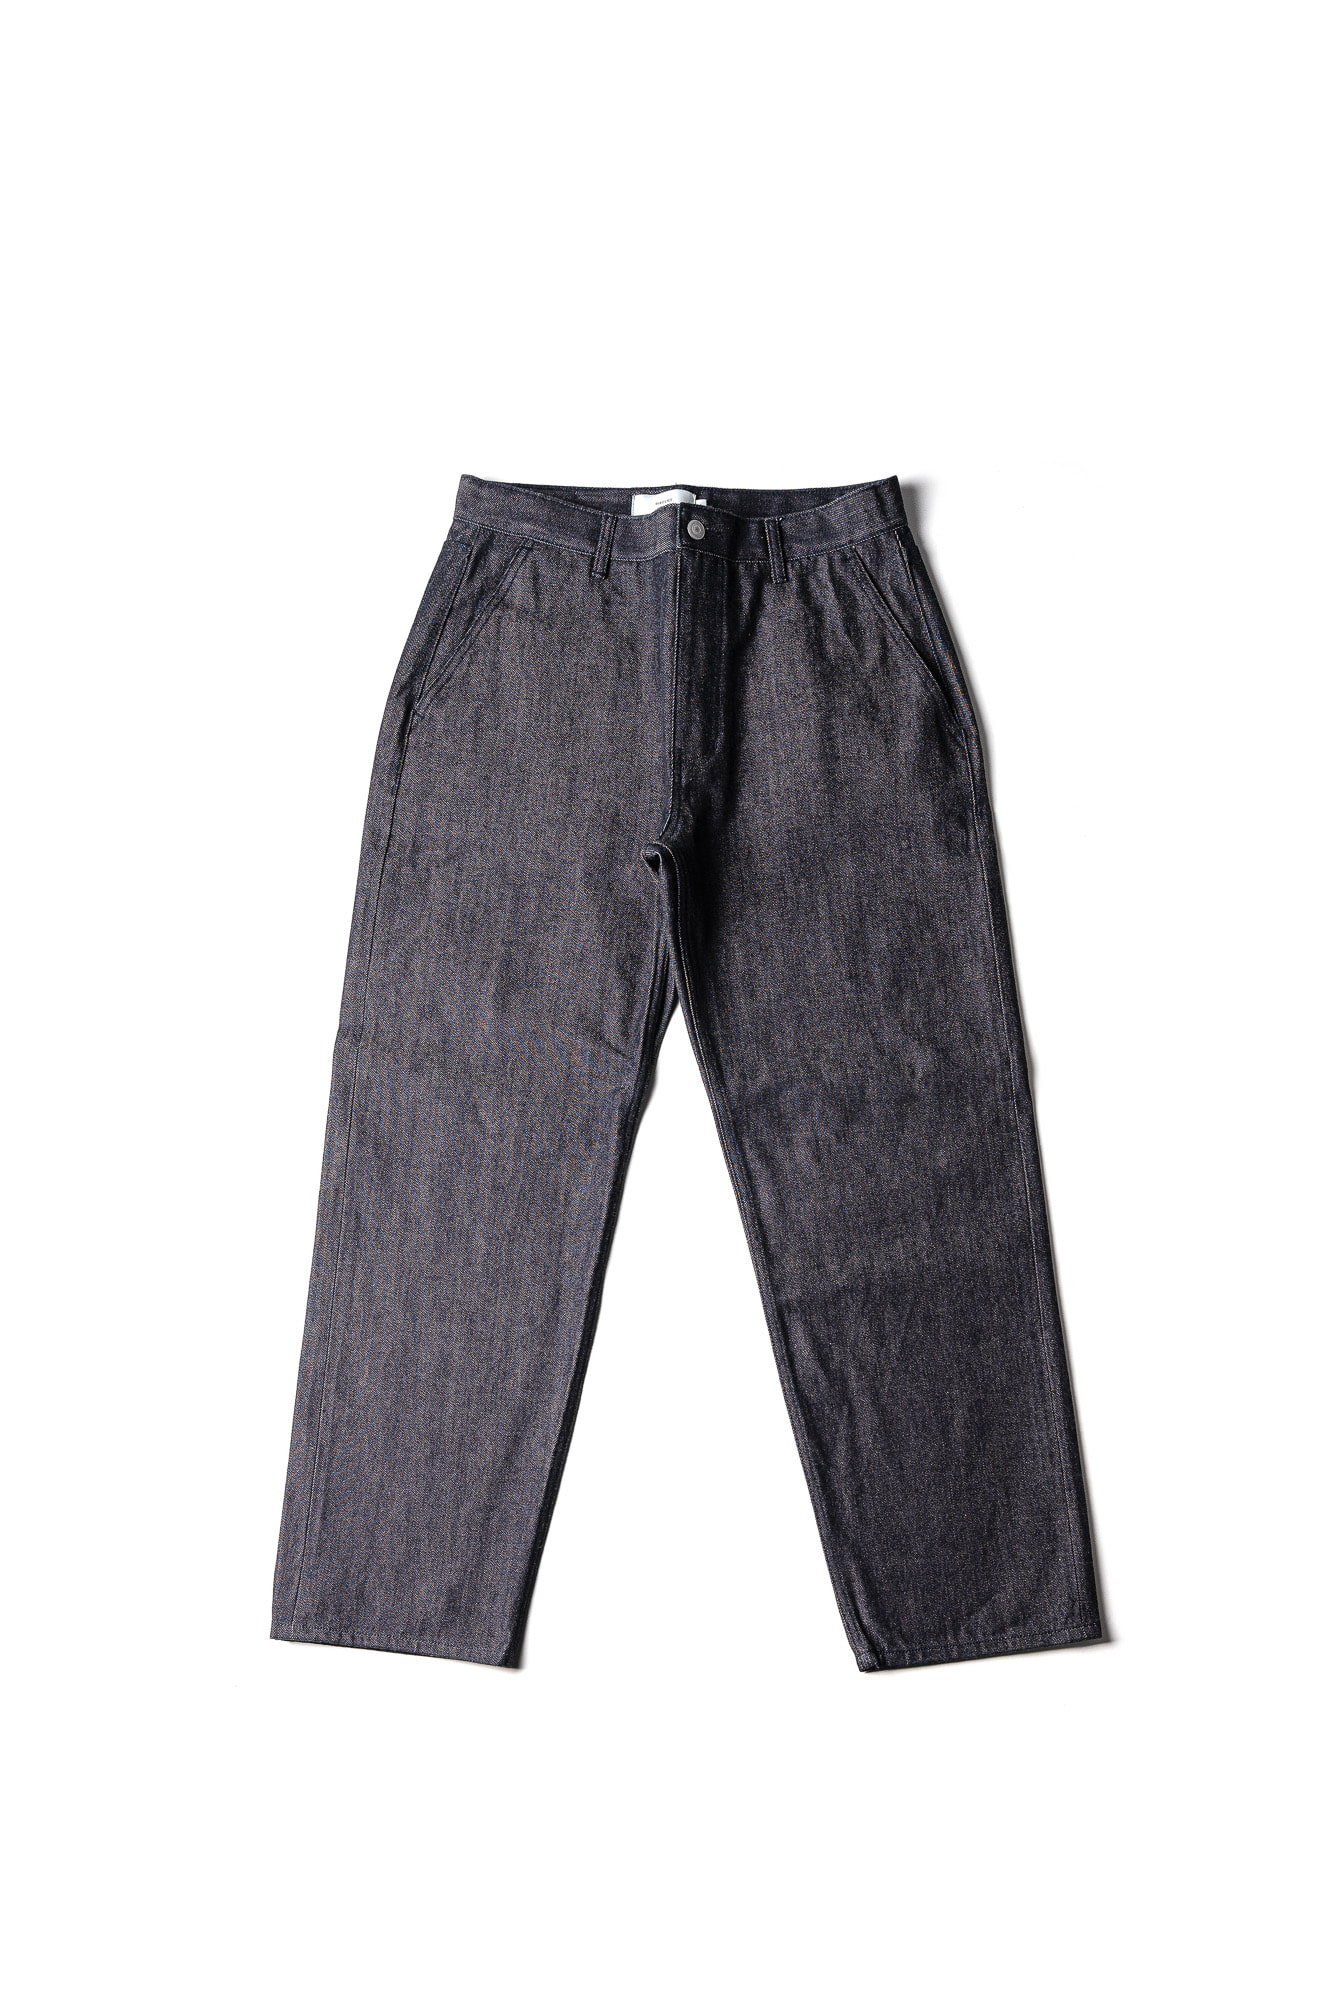 ORGANIC COTTON RELAXED DENIM PANTS (none-wash)